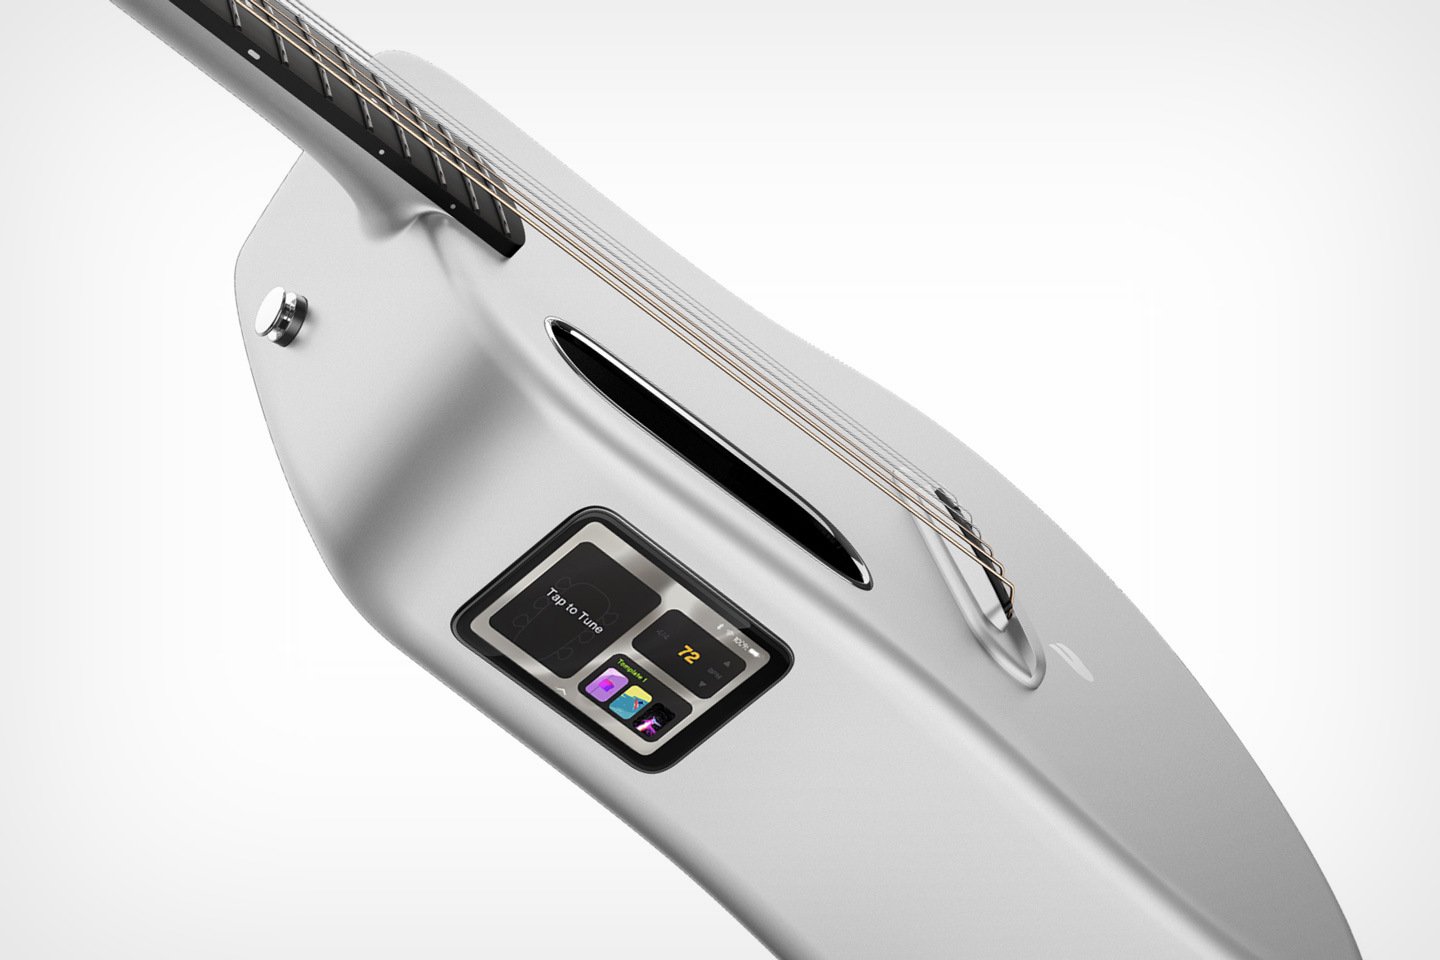 The LAVA ME 3 ‘Smart Guitar’ comes with its own built-in touchscreen that lets you add effects and view tutorials